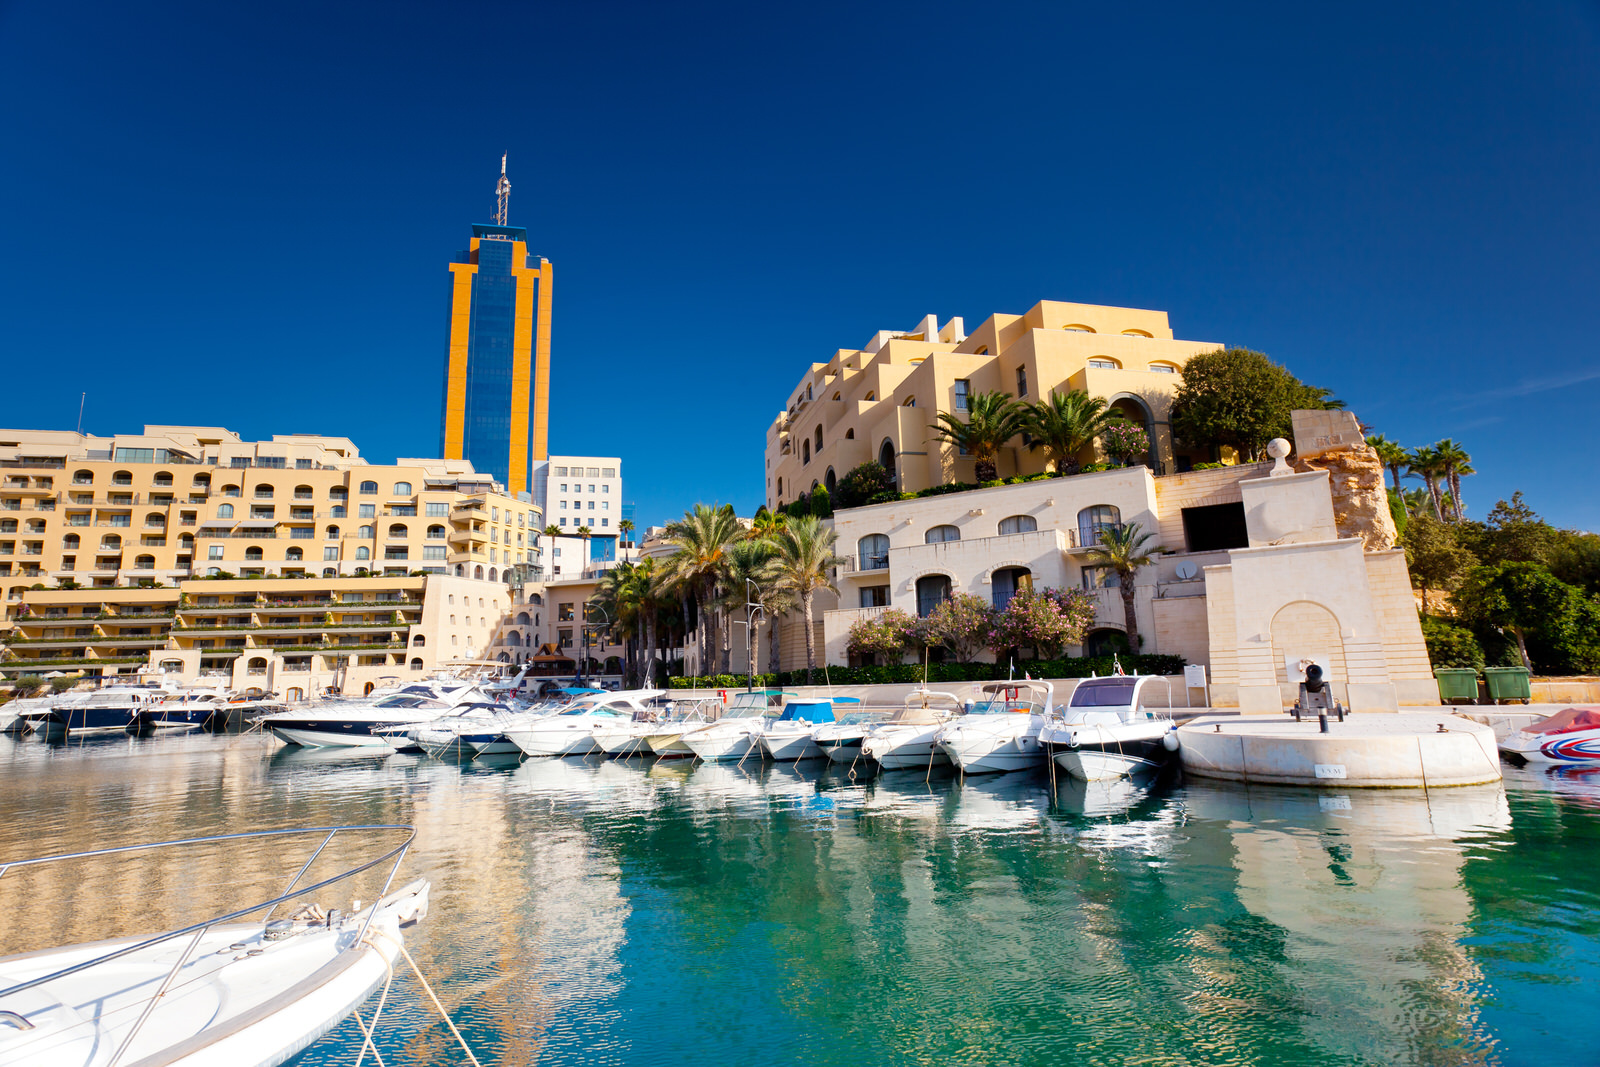 Forbes Covers Malta Gaming Industry Negatively